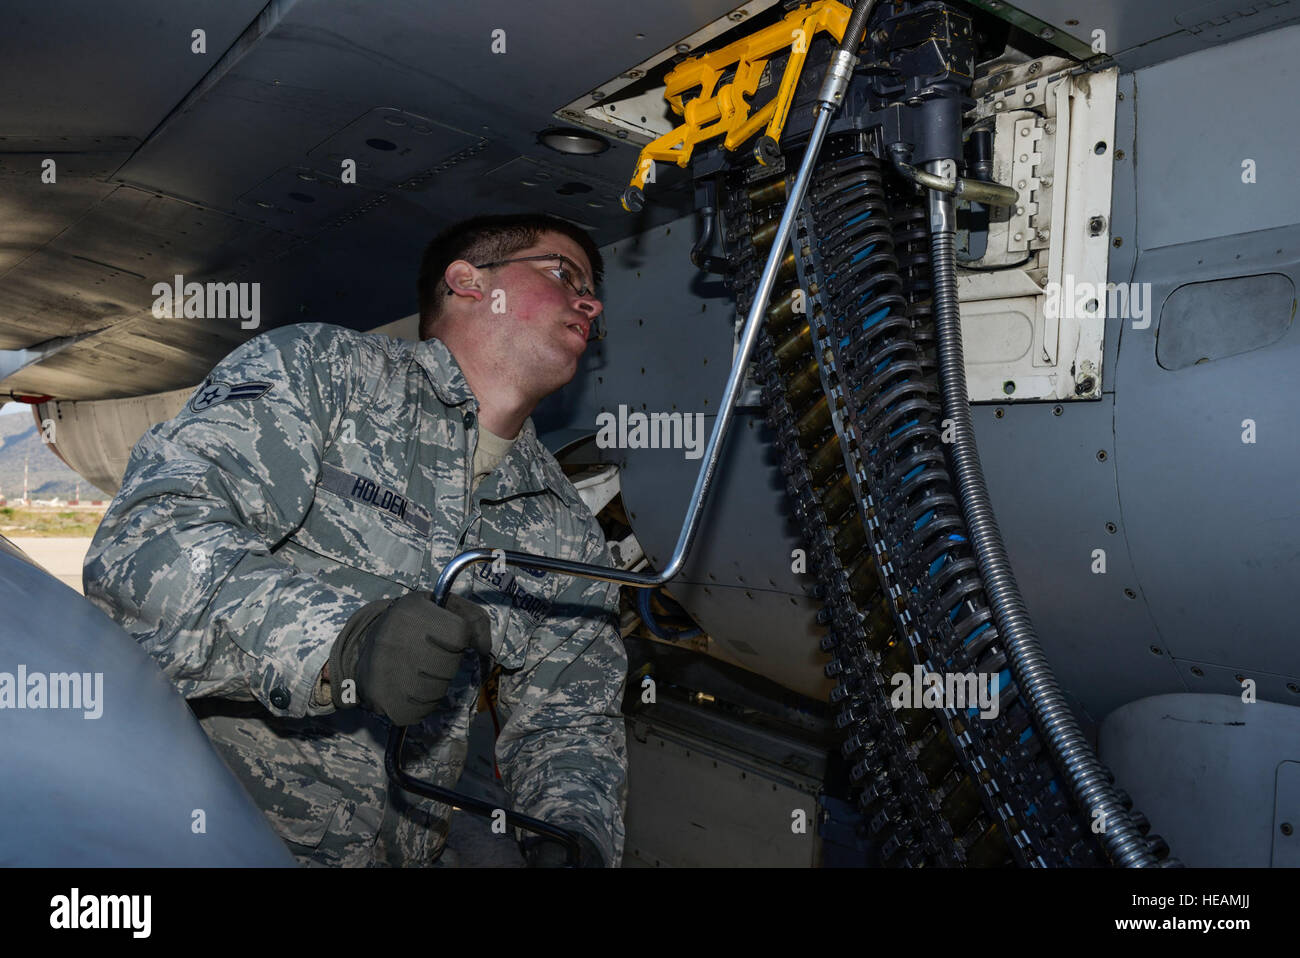 U.S. Air Force Airman 1st Class Austin Holden, a weapons load crew member assigned to the 480th Expeditionary Fighter Squadron, Spangdahlem Air Base, Germany, uses a universal ammunition loading system to load 20 mm practice rounds into an F-16 Fighting Falcon fighter aircraft during a flying training deployment on the flightline at Souda Bay, Greece, Jan. 29, 2016.The inert munitions used during the FTD simulate real conditions the 480th EFS pilots might use when engaging enemy forces.  Staff Sgt. Christopher Ruano Stock Photo